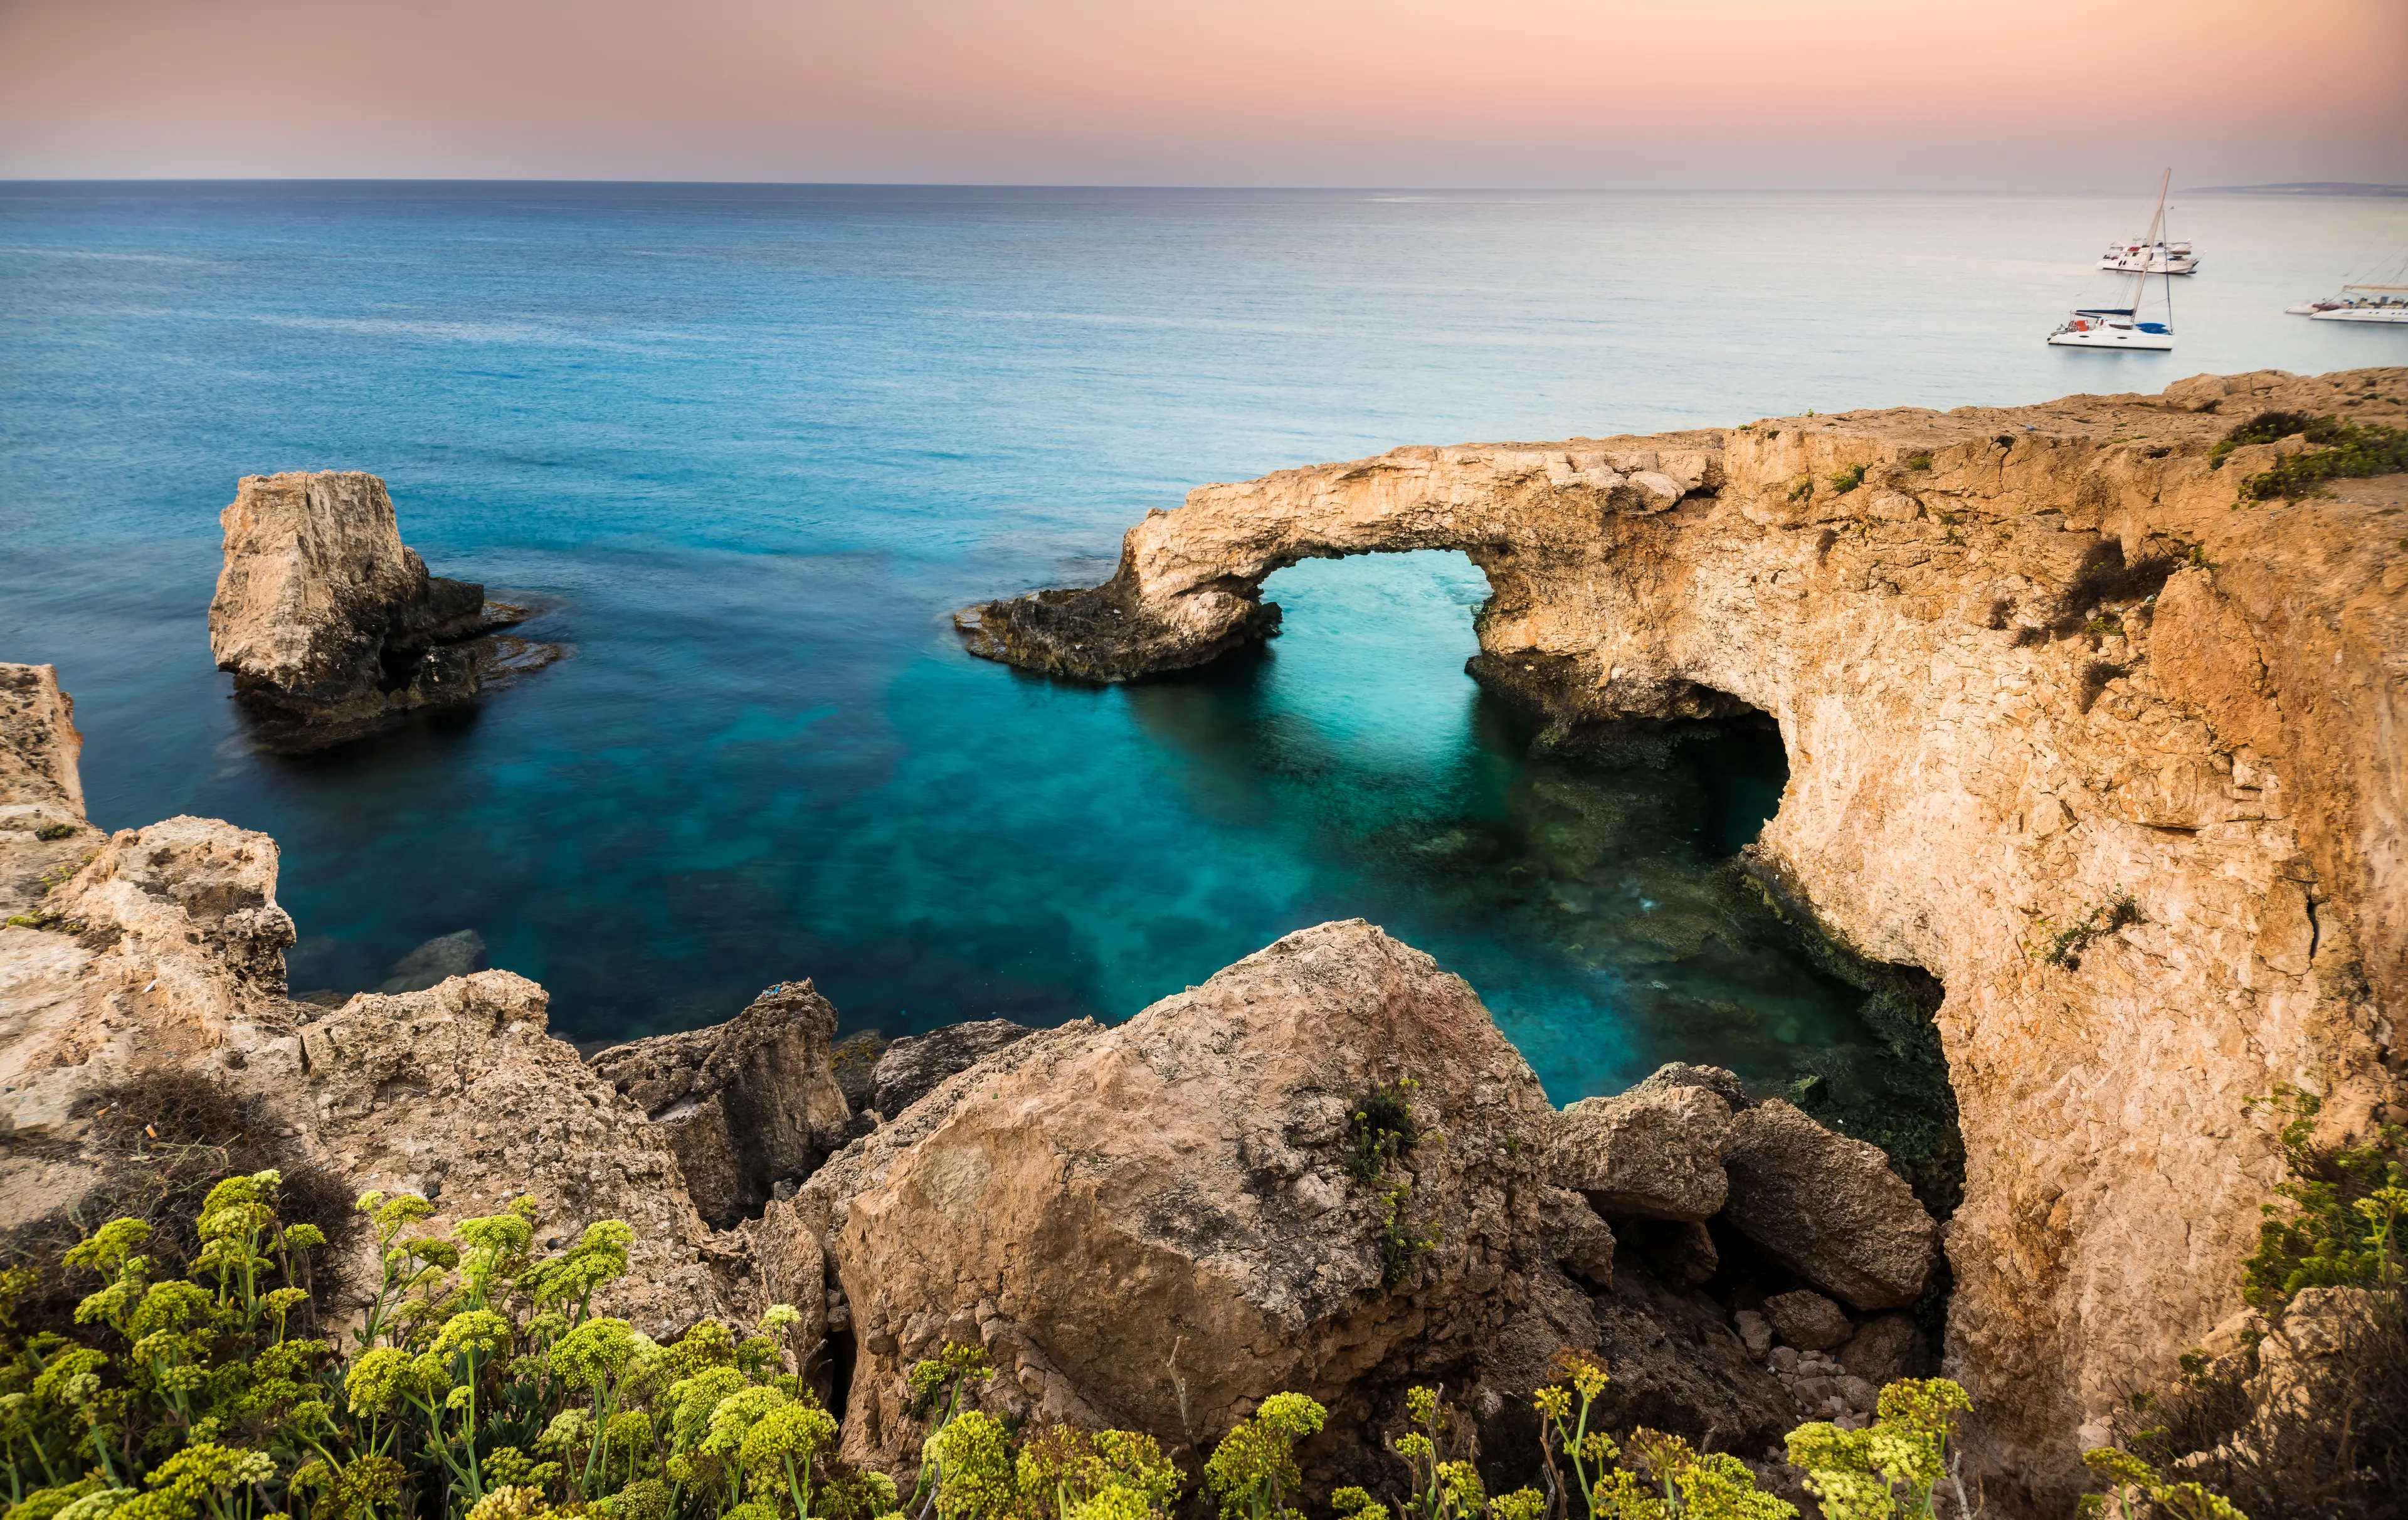 5-Day Cyprus Adventure: Sightseeing, Outdoor Activities & Shopping